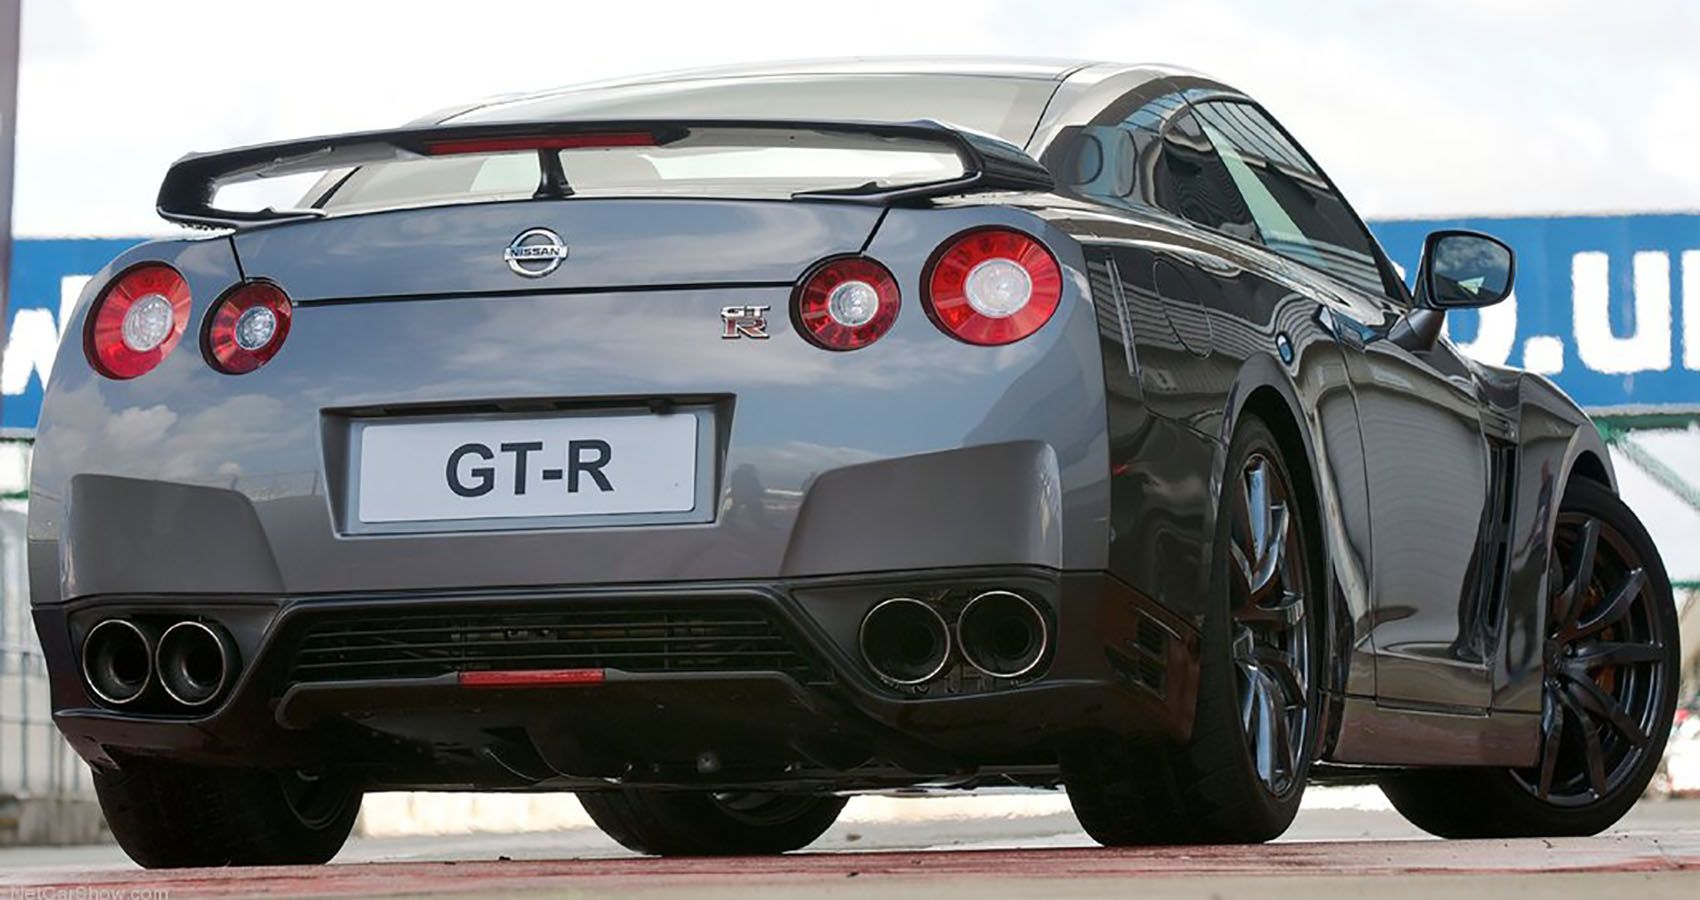 2012-r35-nissan-gt-r-exterior-rear-angle-view